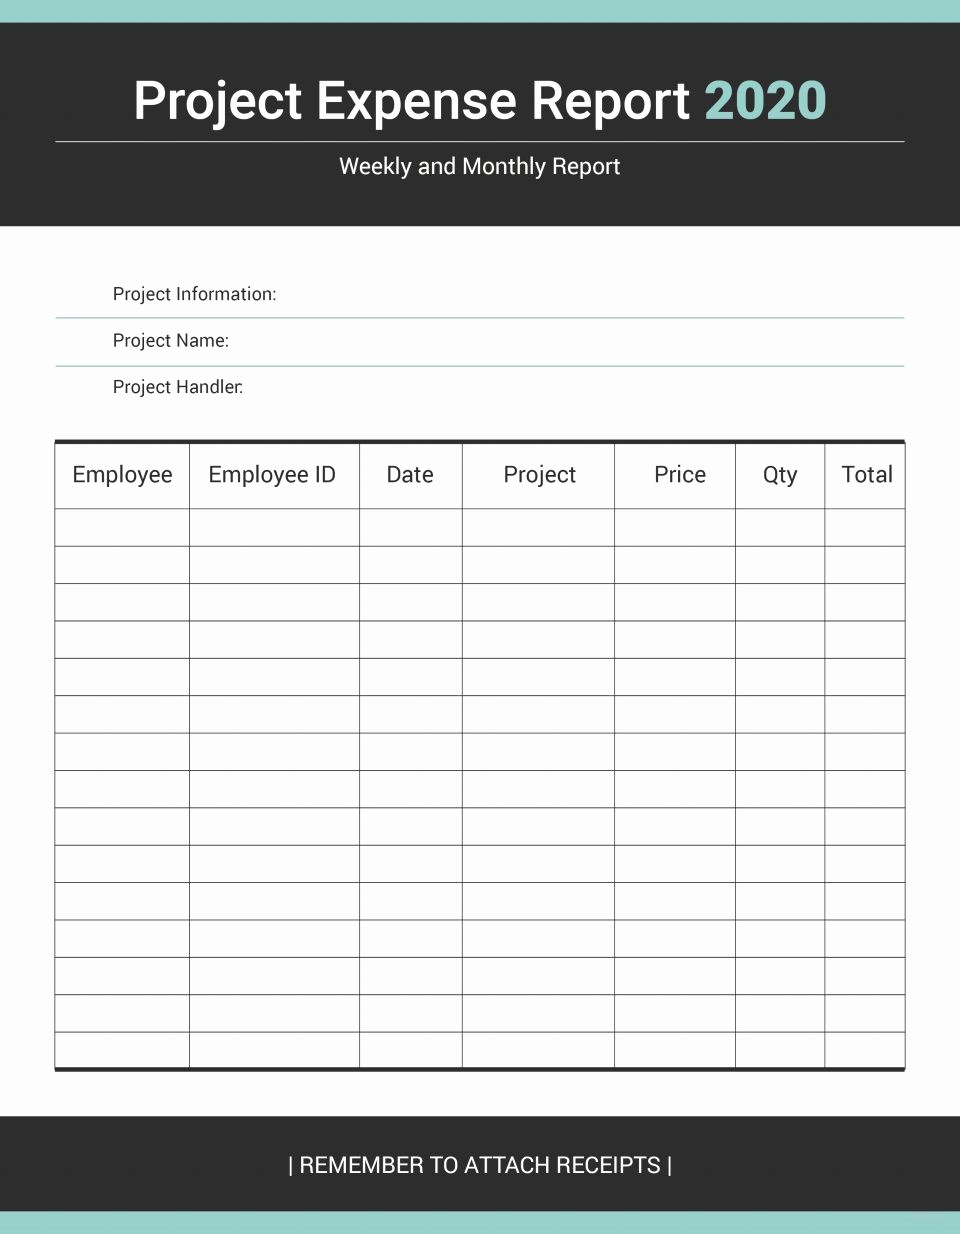 Project Report format In Word Awesome Research Project Report Template Awesome Latexmat Free